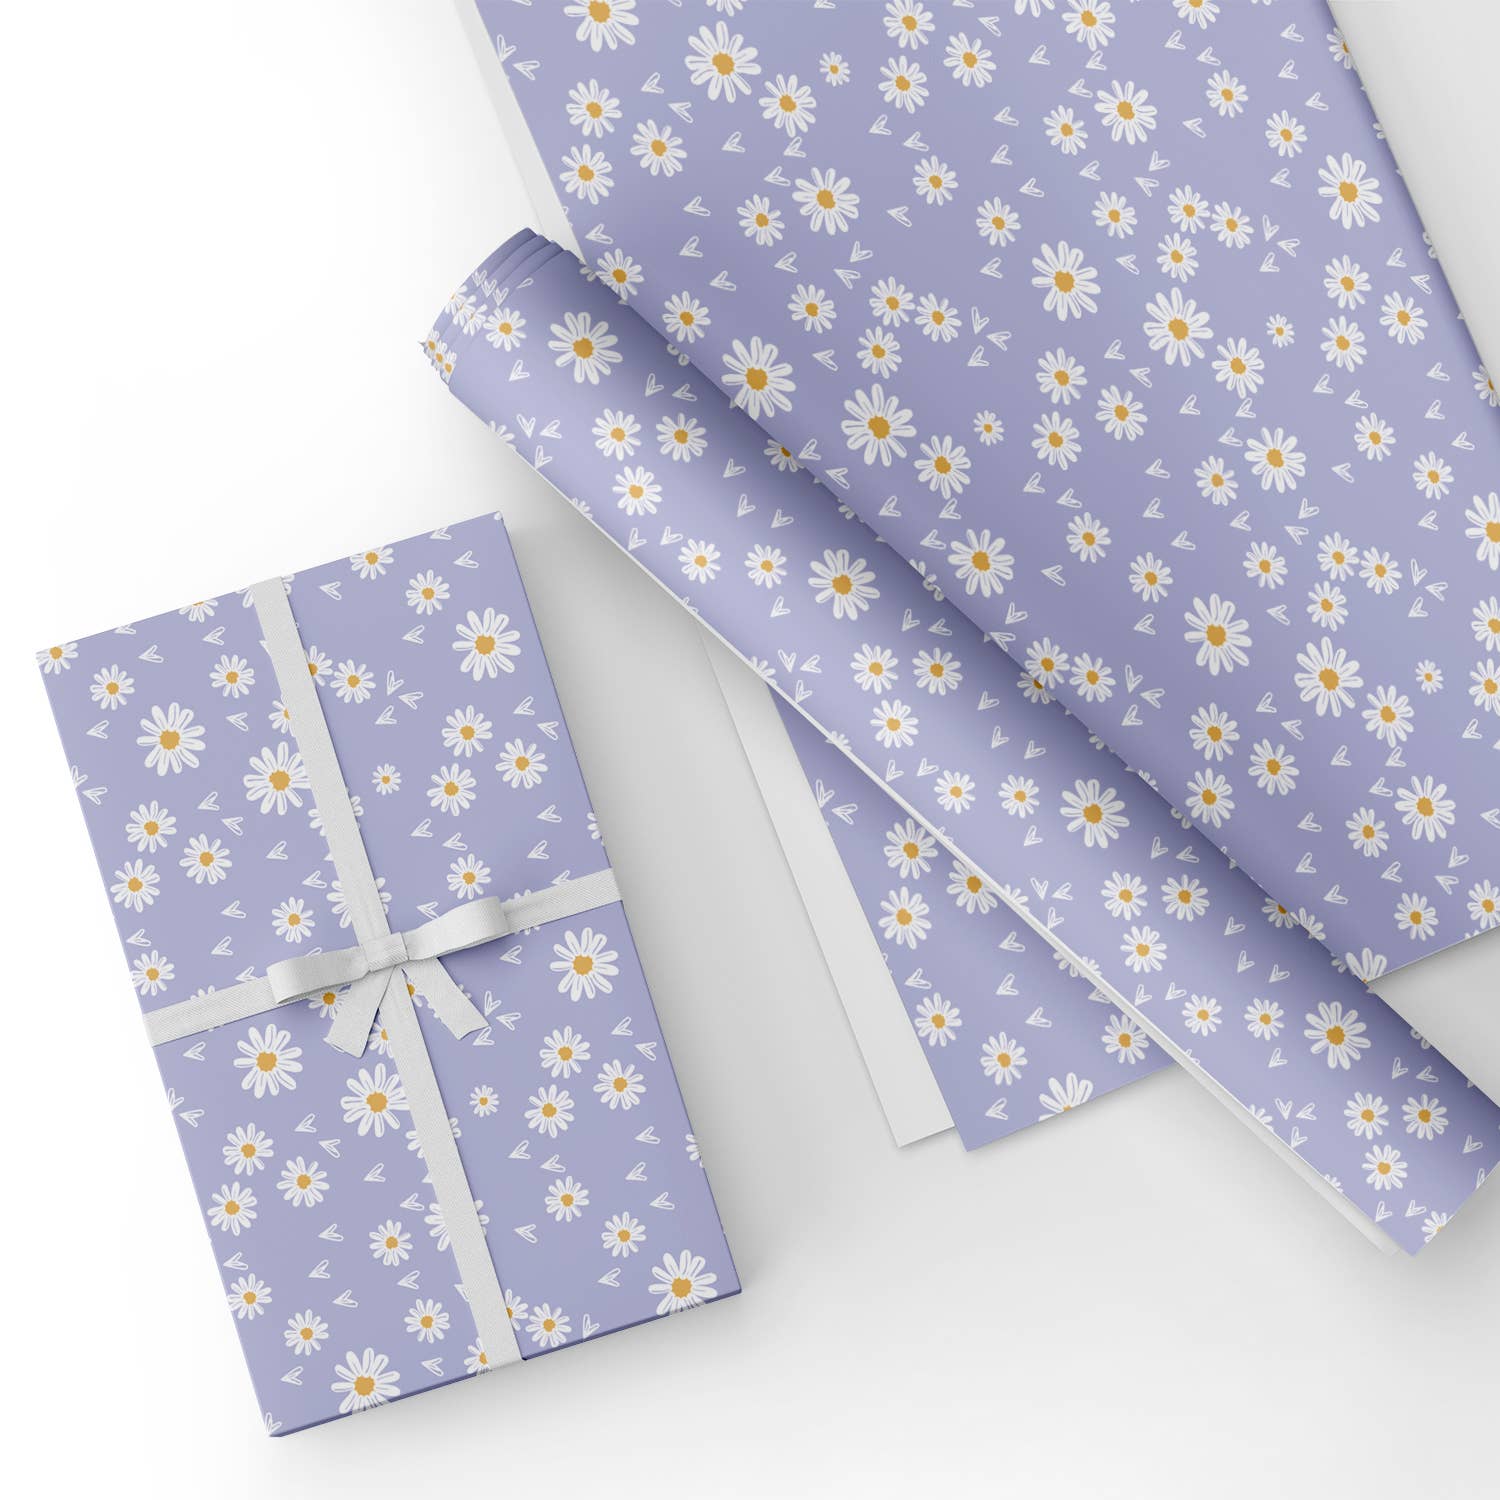 Lavender Lilac Daisy Flat Wrapping Paper Sheet Wholesale Wraphaholic